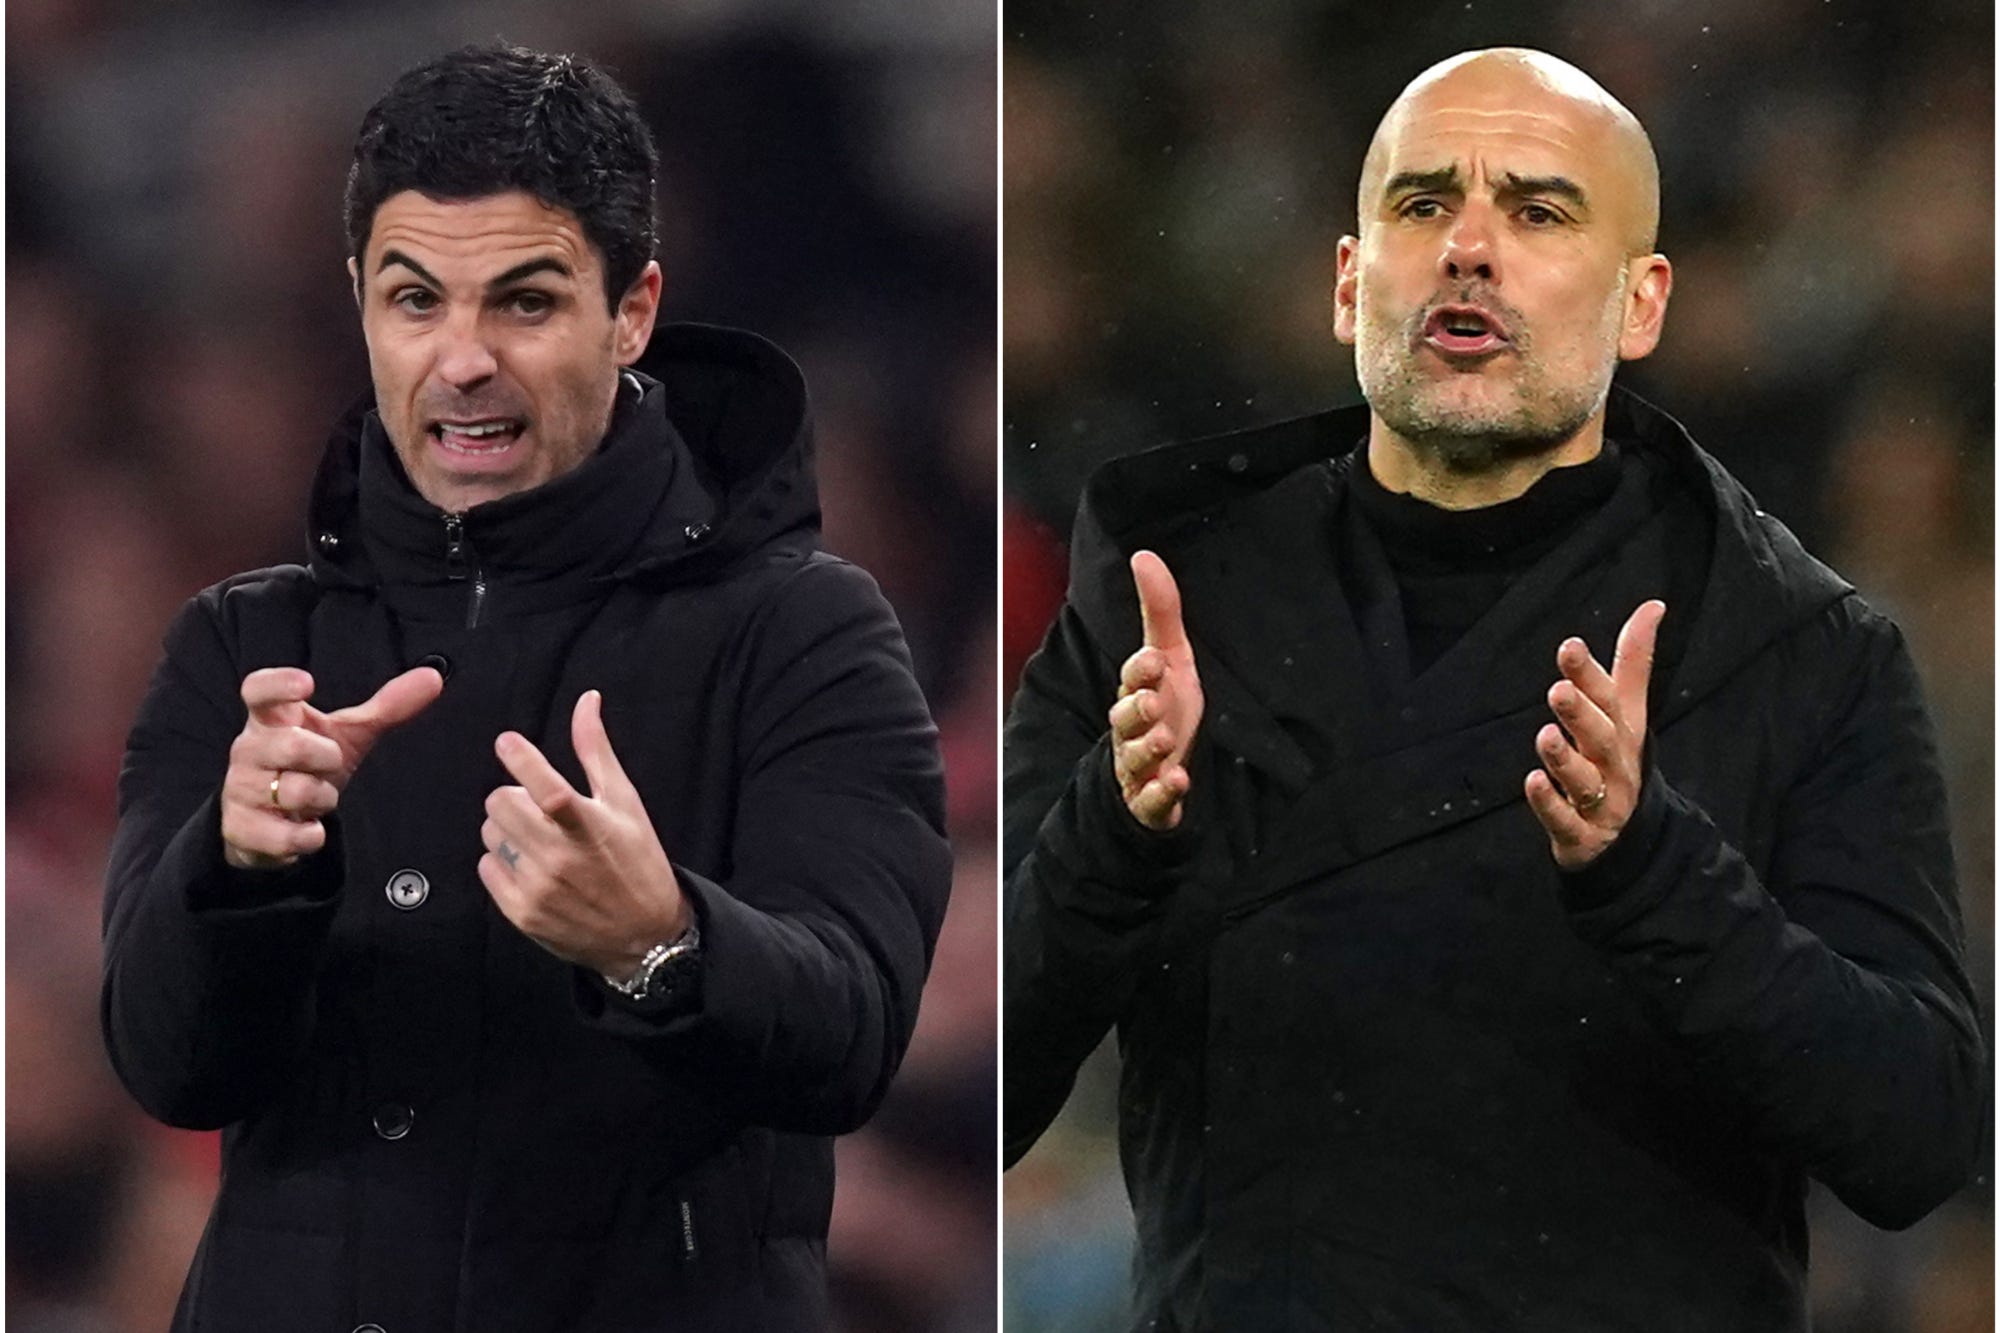 Mikel Arteta and Pep Guardiola lead their sides into a title showdown at the Etihad